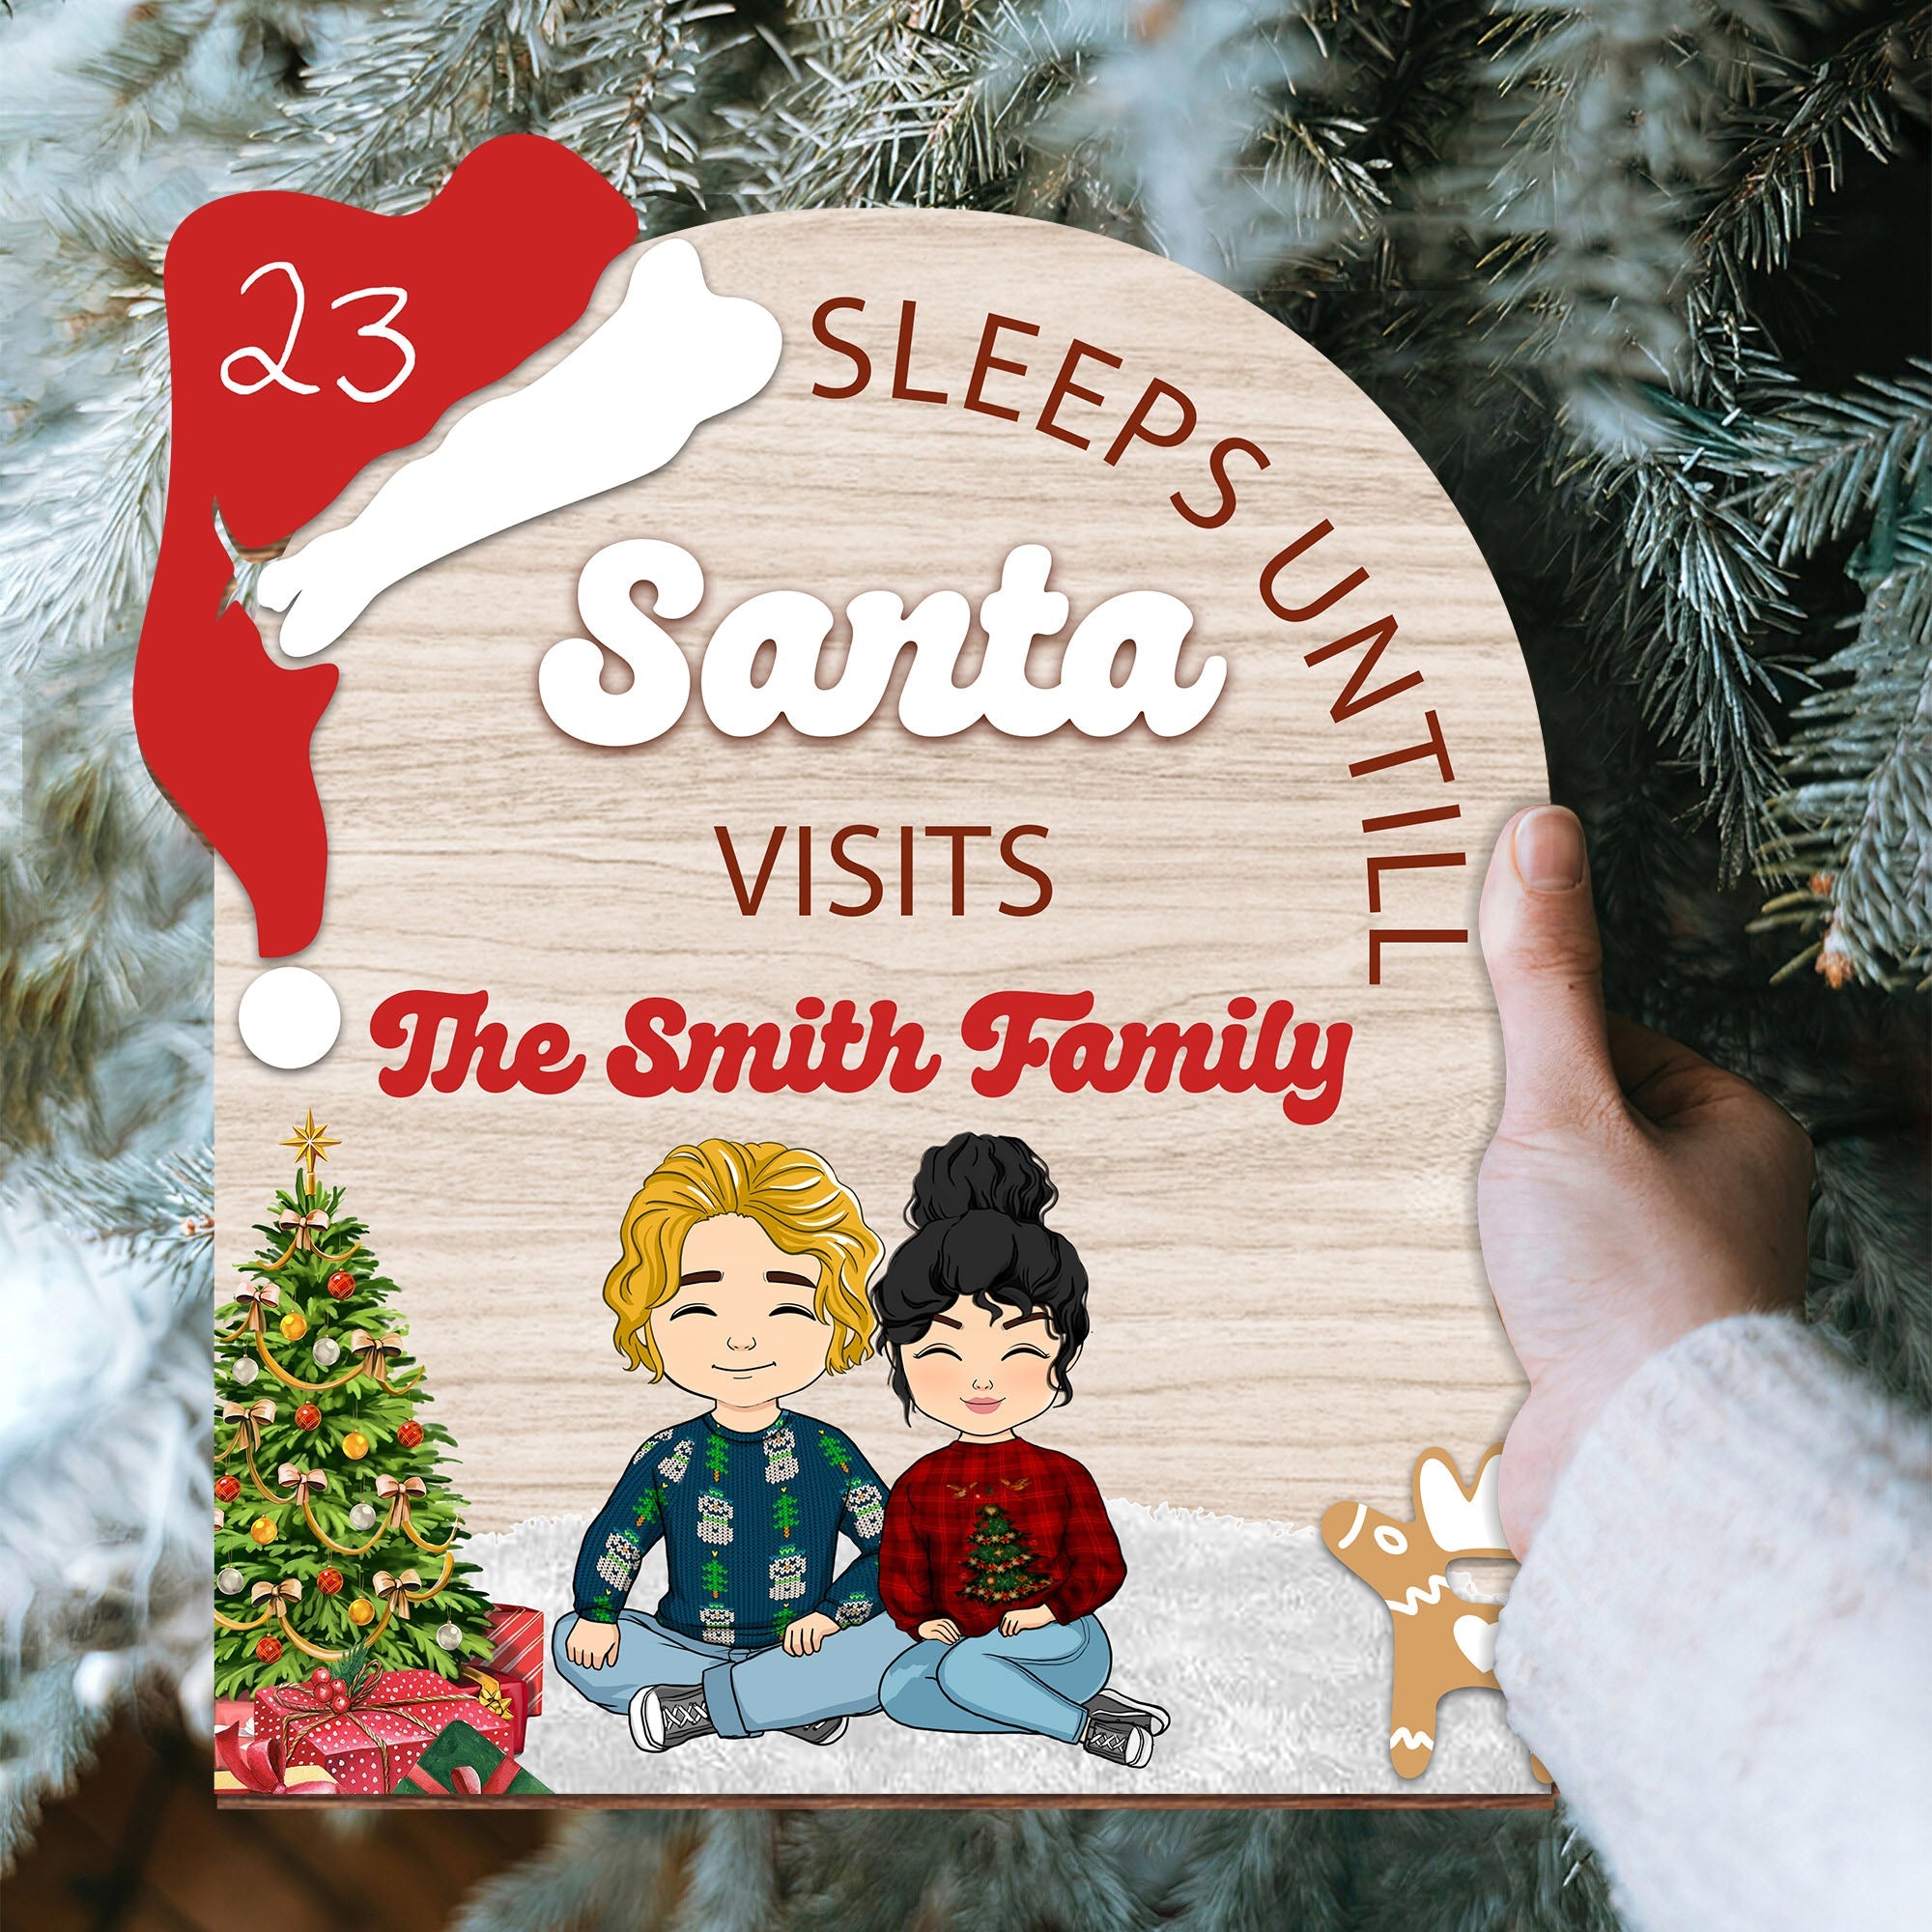 Sleeps Until Santa Visits Our Family - Counting By Yourself -  Christmas Countdown Sign